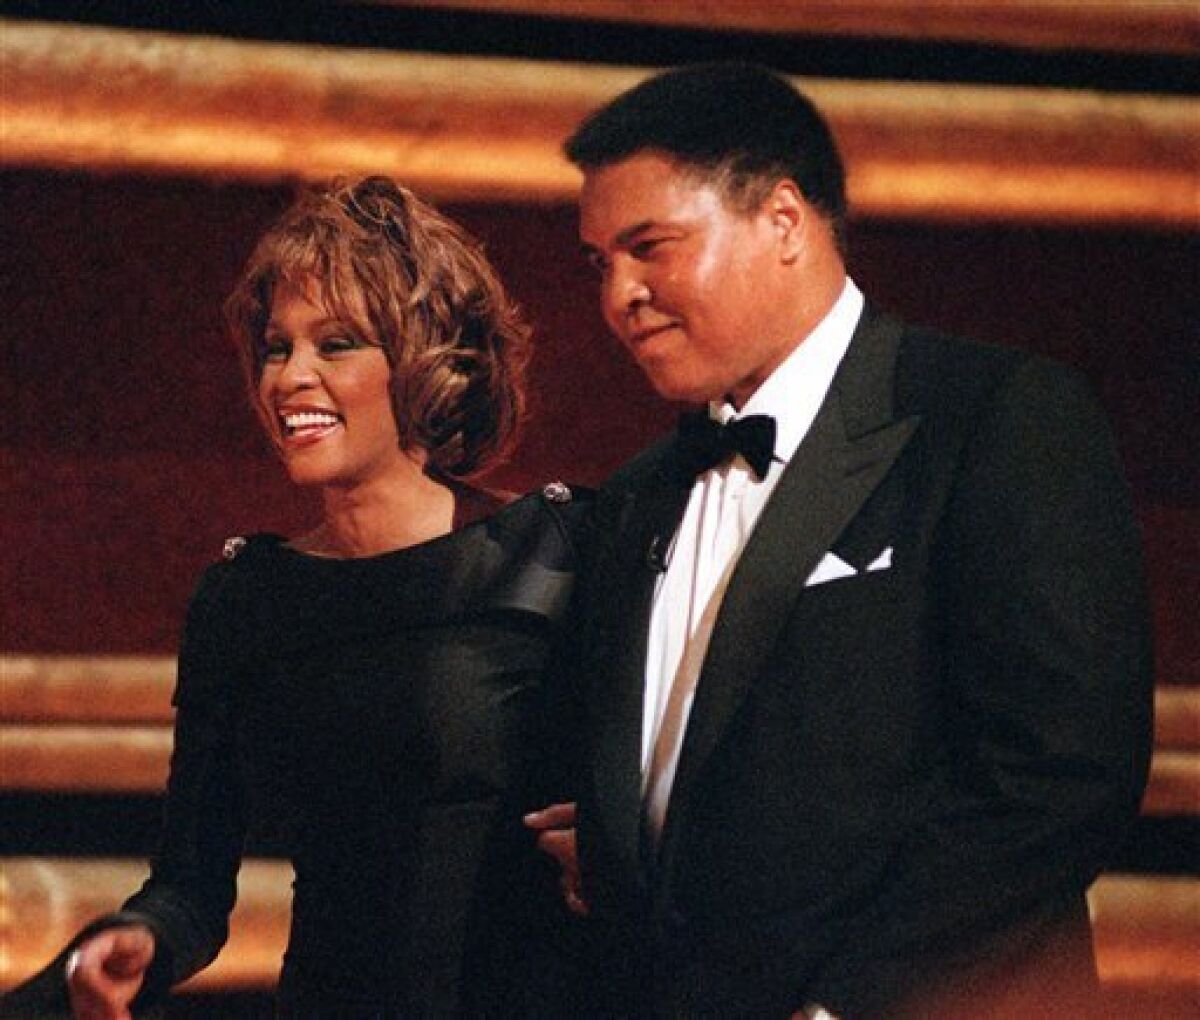 FILE - In this Oct. 21, 1998 file photo, former World Heavyweight Boxing Champion Muhammad Ali is greeted by singer Whitney Houston as he arrives on stage at New York's Radio City Music Hall to accept a GQ "Men of the Year" Award. Whitney Houston, who reigned as pop music's queen until her majestic voice and regal image were ravaged by drug use, has died, Saturday, Feb. 11, 2012. She was 48. (AP Photo/Mitch Jacobson, File)